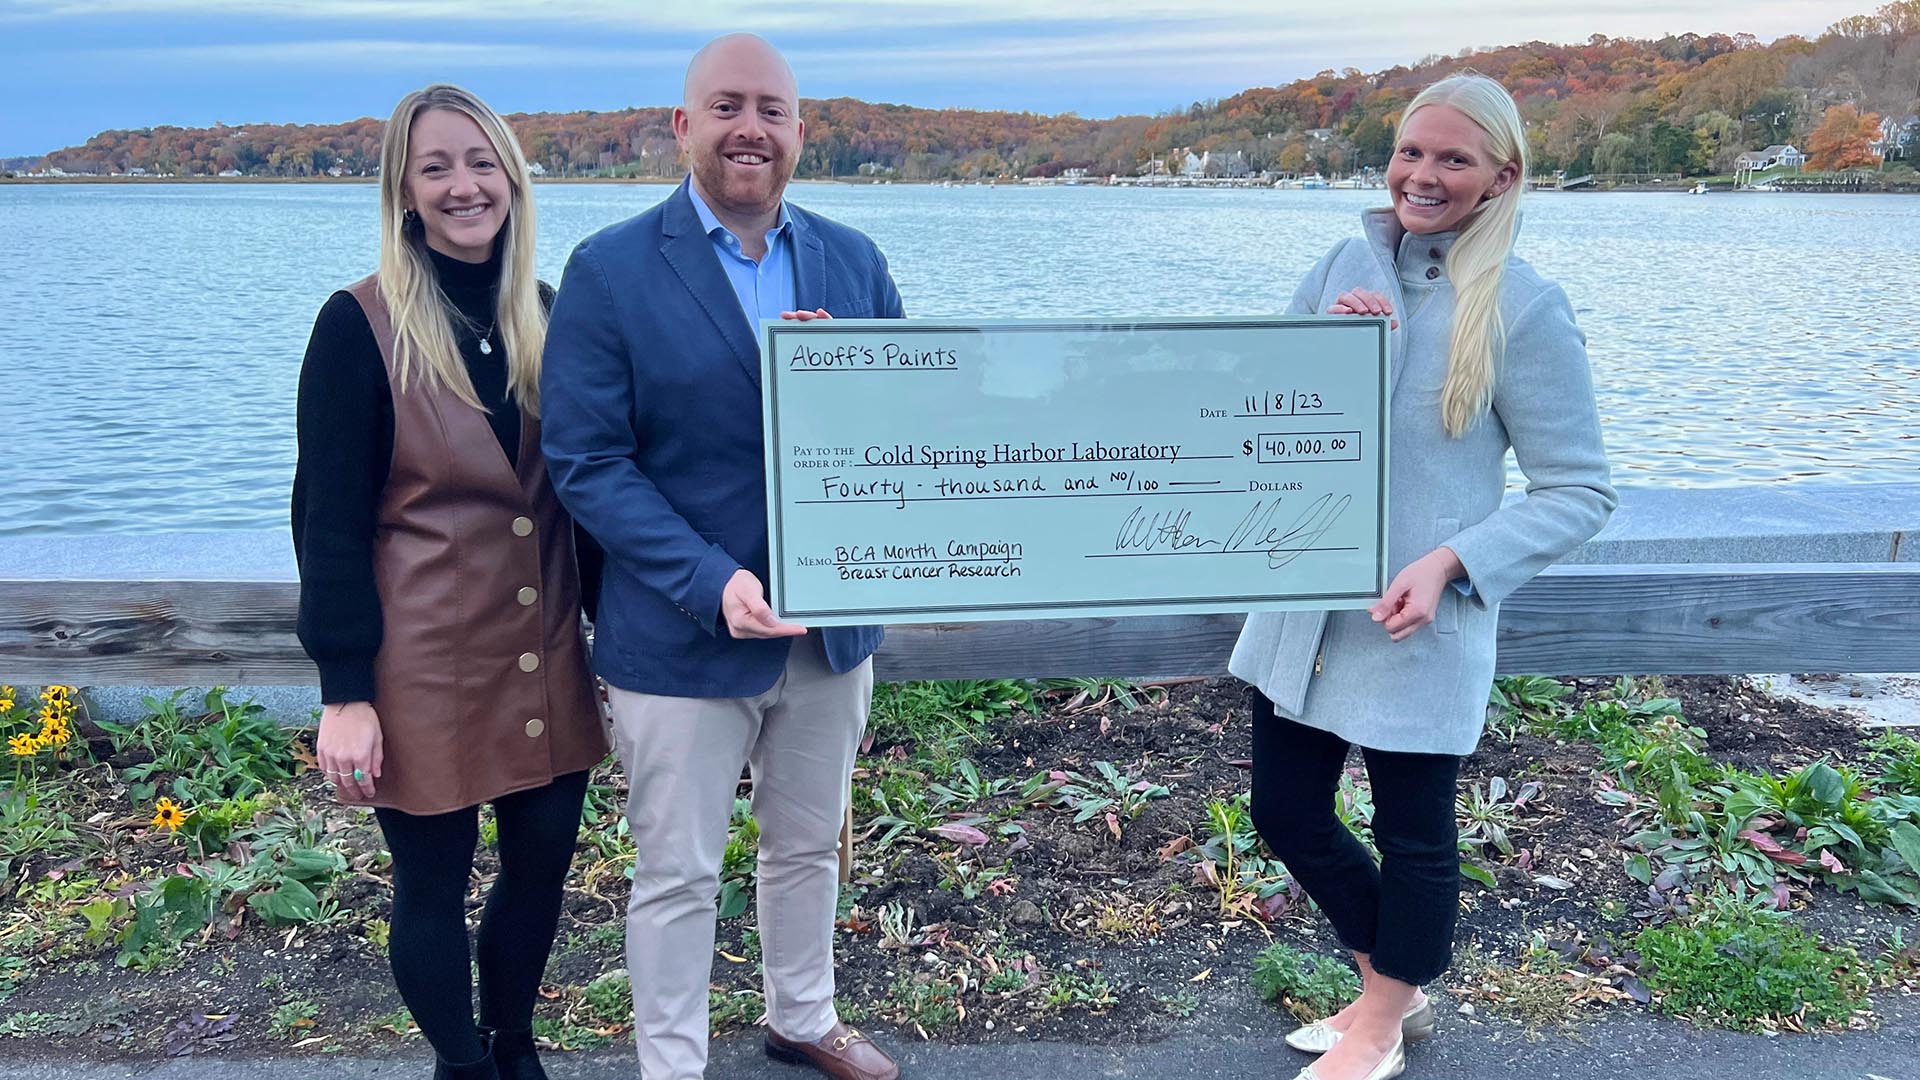 Aboff’s Paints Raises Over $40,000 for CSHL’s Breast Cancer Research